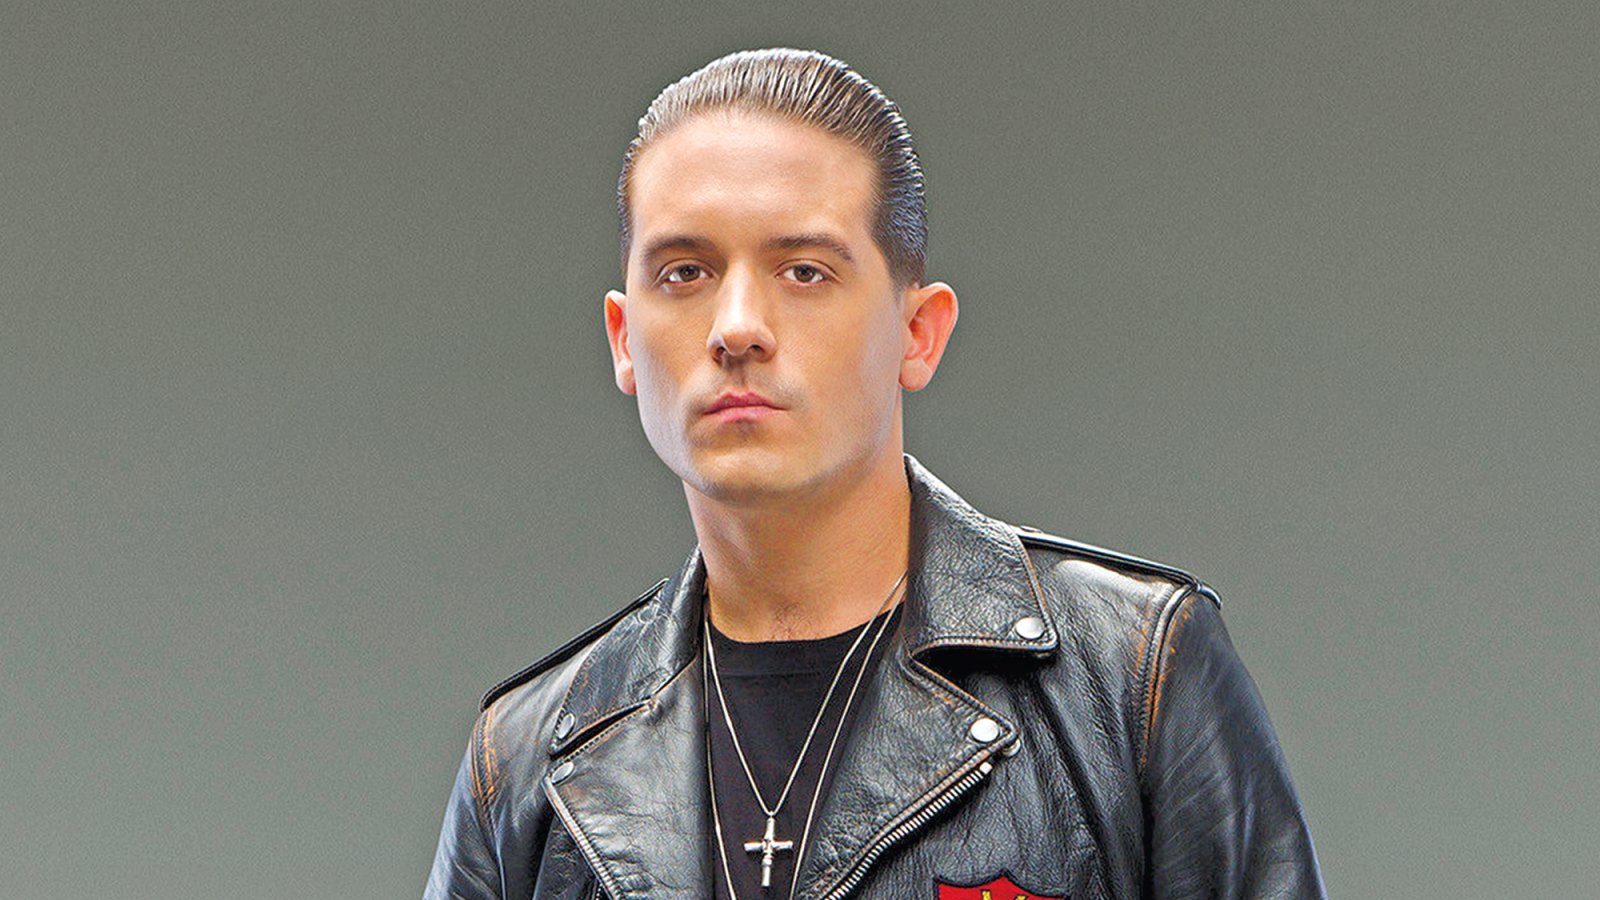 G-Eazy: 25 Things You Don't Know About Me